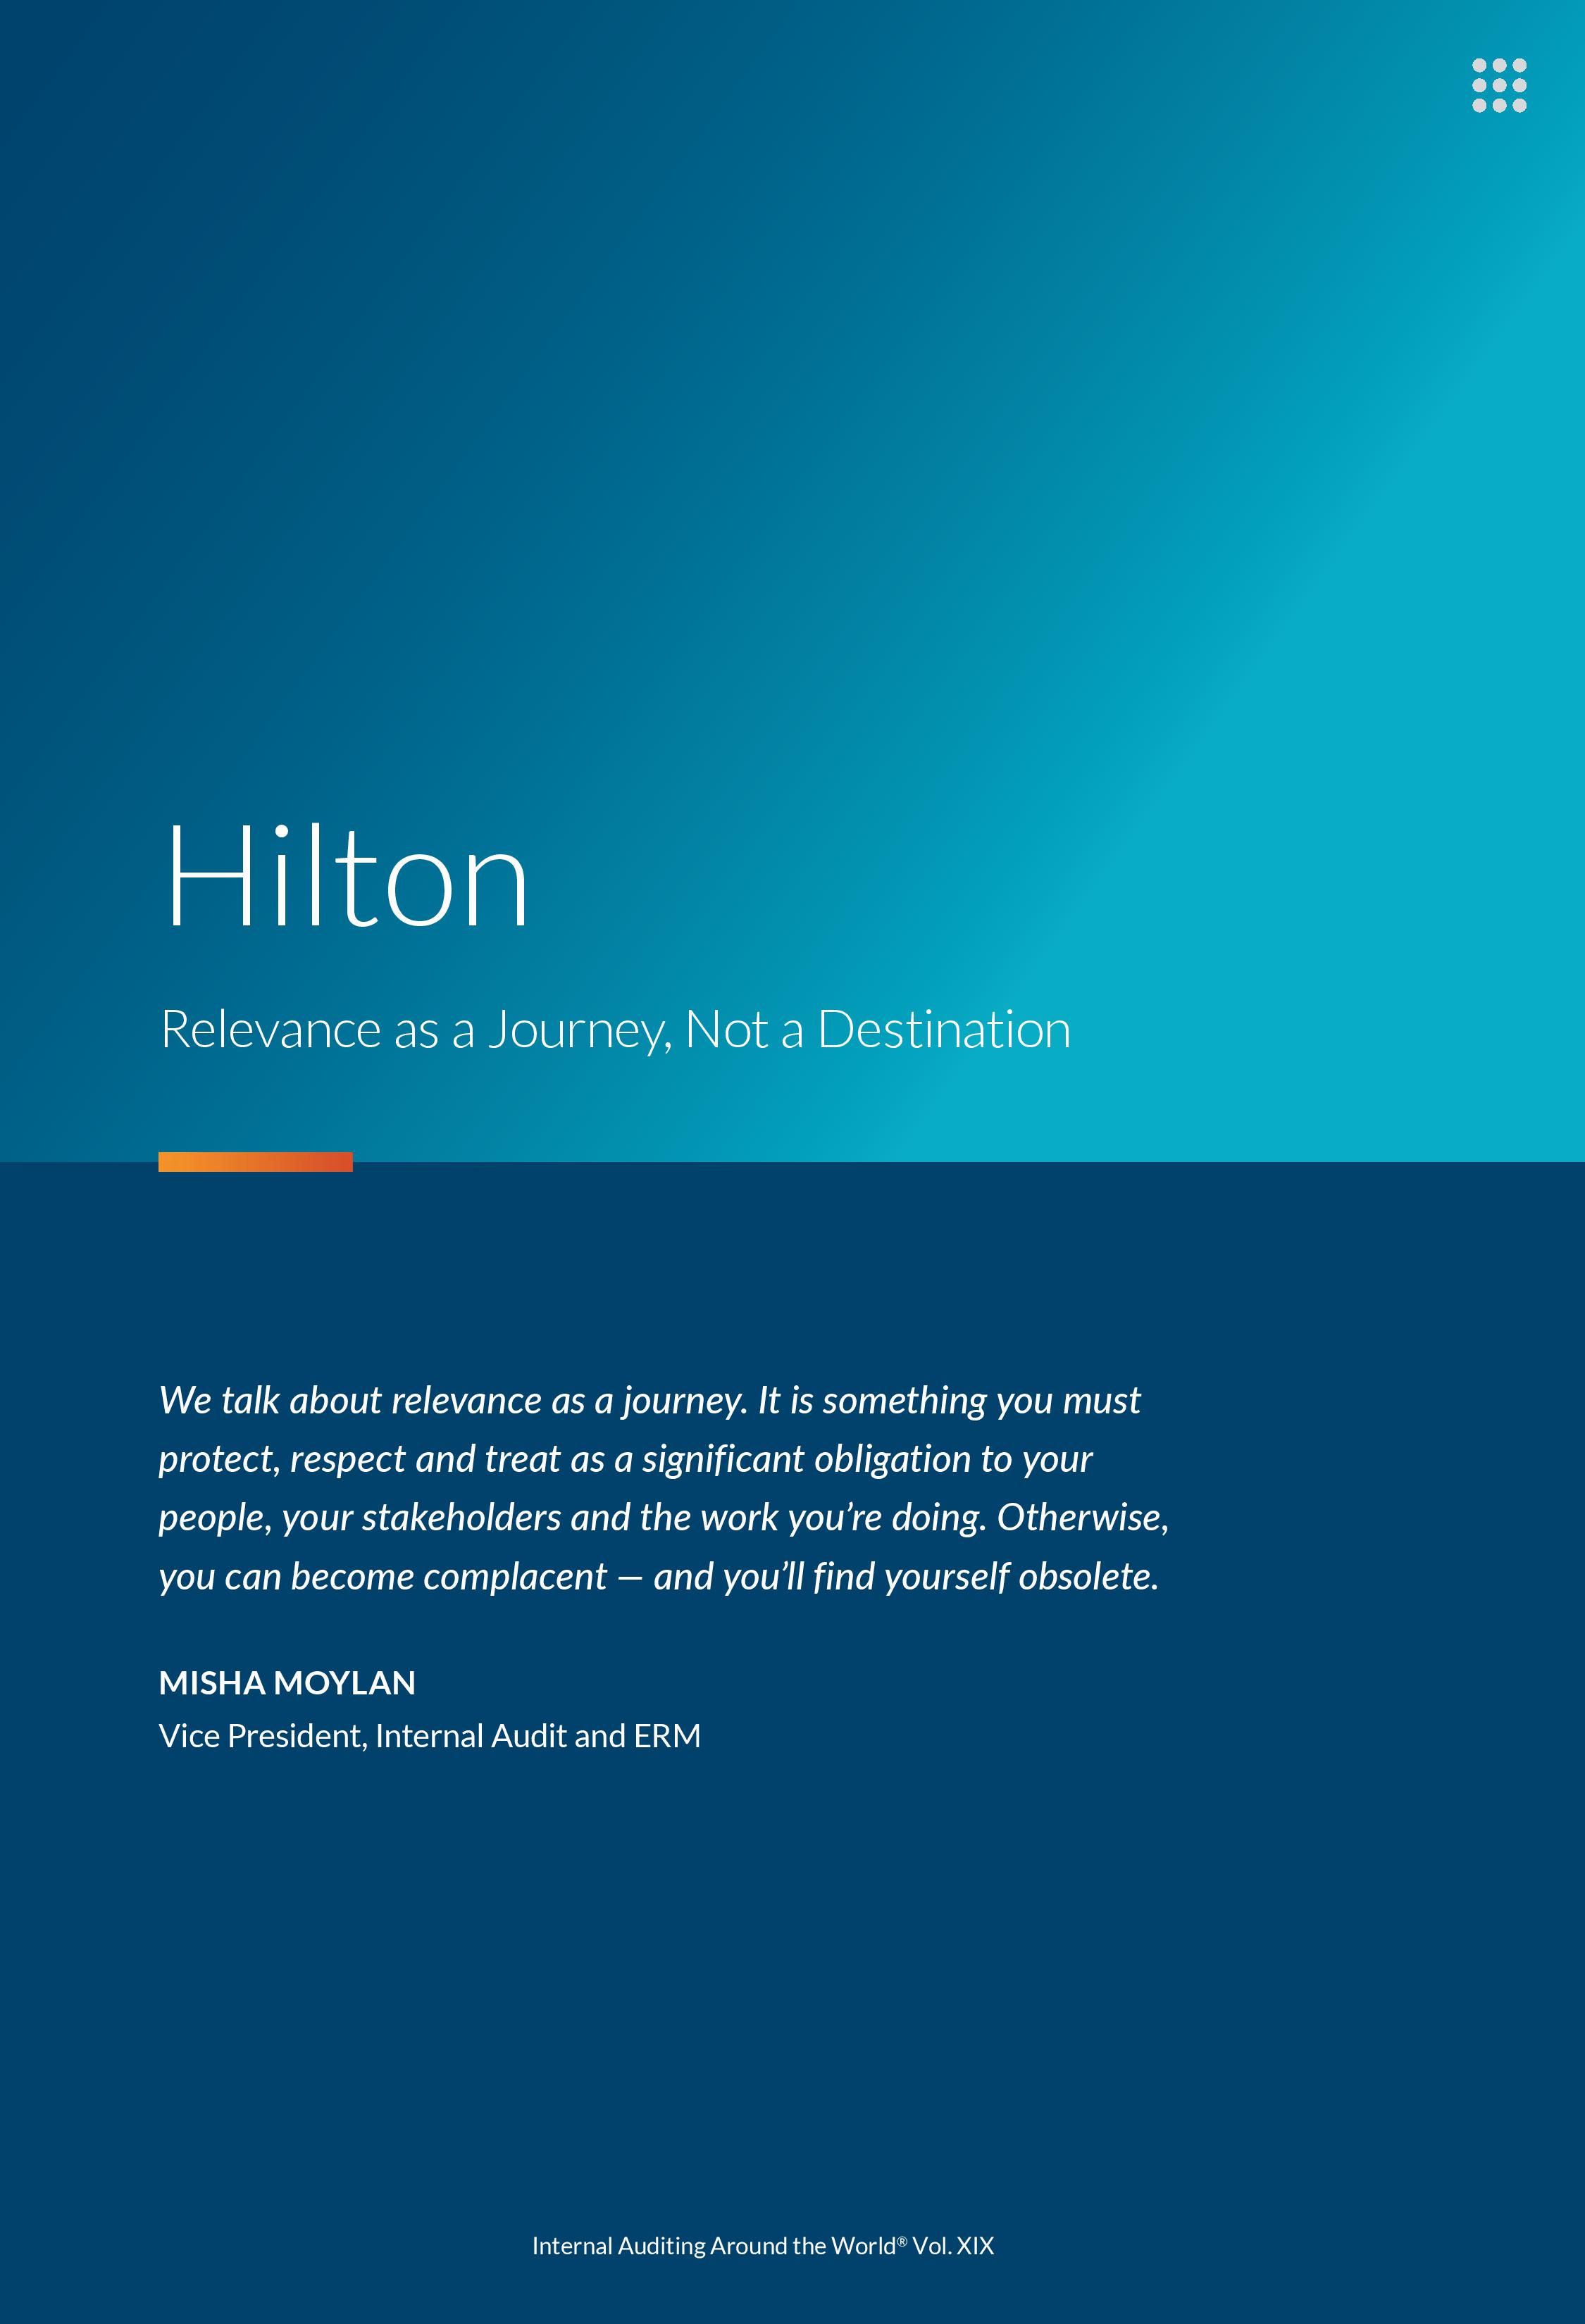 screenshot of the first page of Hilton Relevance as a Journey, Not a Destination